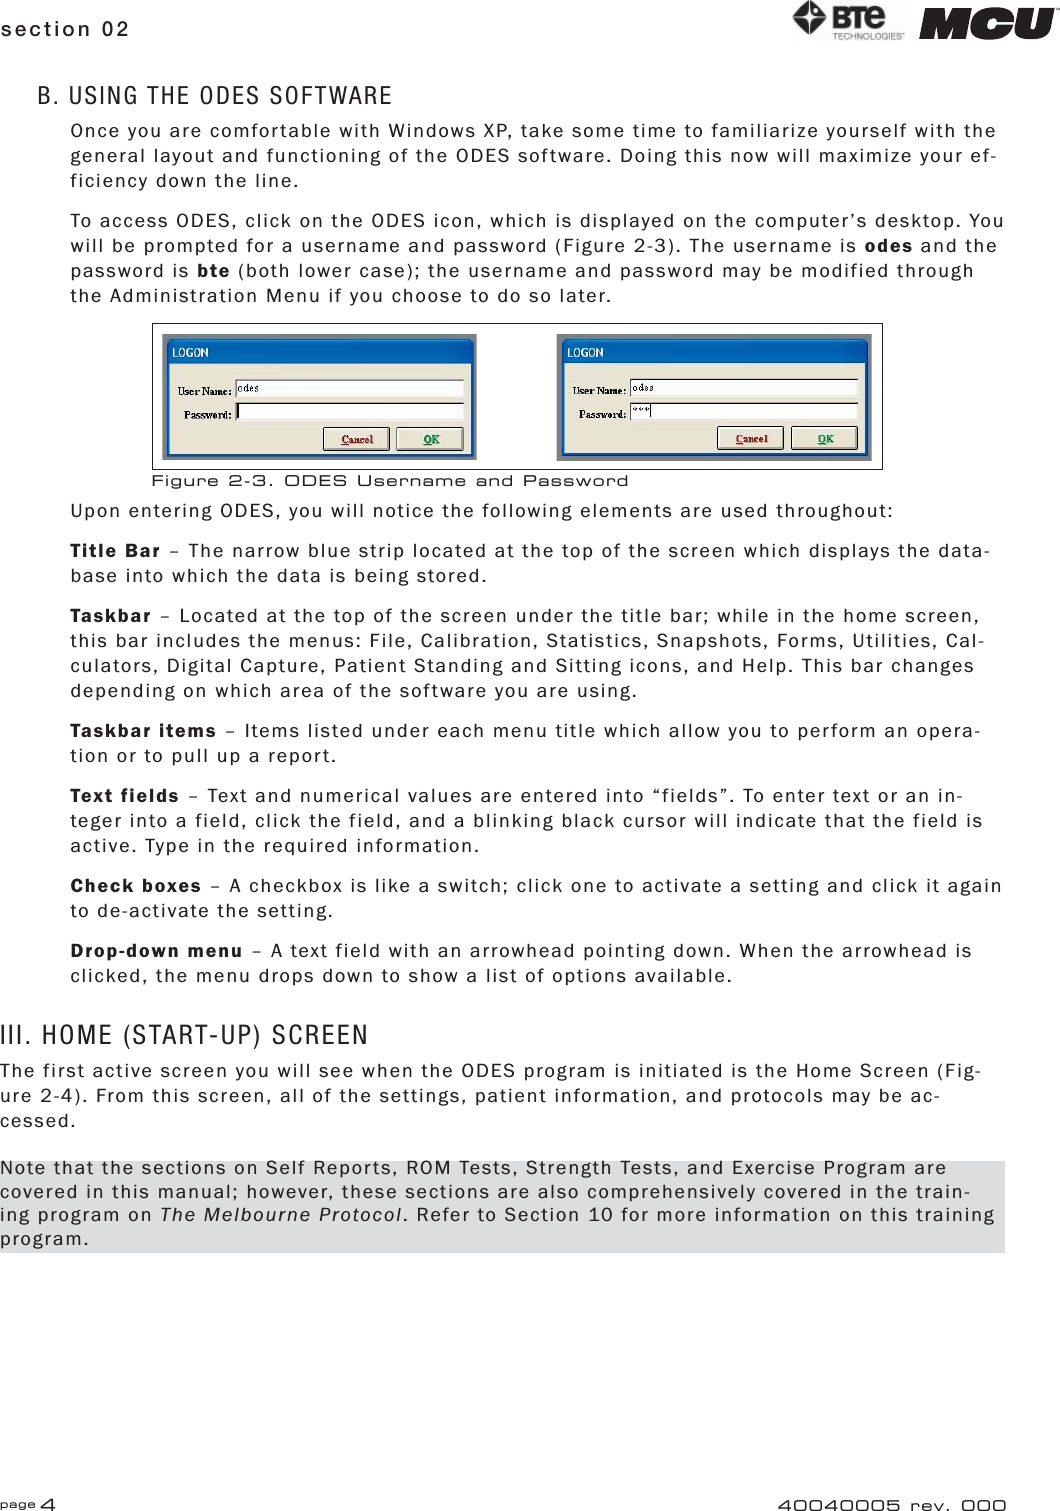 page 4section 02 40040005 rev. 000B. USING THE ODES SOFTWAREOnce you are comfortable with Windows XP, take some time to familiarize yourself with the general layout and functioning of the ODES software. Doing this now will maximize your ef-ficiency down the line.To access ODES, click on the ODES icon, which is displayed on the computer’s desktop. You will be prompted for a username and password (Figure 2-3). The username is odes and the password is bte (both lower case); the username and password may be modified through the Administration Menu if you choose to do so later.Upon entering ODES, you will notice the following elements are used throughout:Title Bar – The narrow blue strip located at the top of the screen which displays the data-base into which the data is being stored.Taskbar – Located at the top of the screen under the title bar; while in the home screen, this bar includes the menus: File, Calibration, Statistics, Snapshots, Forms, Utilities, Cal-culators, Digital Capture, Patient Standing and Sitting icons, and Help. This bar changes depending on which area of the software you are using.Taskbar items – Items listed under each menu title which allow you to perform an opera-tion or to pull up a report.Text fields – Text and numerical values are entered into “fields”. To enter text or an in-teger into a field, click the field, and a blinking black cursor will indicate that the field is active. Type in the required information.Check boxes – A checkbox is like a switch; click one to activate a setting and click it again to de-activate the setting.Drop-down menu – A text field with an arrowhead pointing down. When the arrowhead is clicked, the menu drops down to show a list of options available.III. HOME (START-UP) SCREENThe first active screen you will see when the ODES program is initiated is the Home Screen (Fig-ure 2-4). From this screen, all of the settings, patient information, and protocols may be ac-cessed.Figure 2-3. ODES Username and PasswordNote that the sections on Self Reports, ROM Tests, Strength Tests, and Exercise Program are covered in this manual; however, these sections are also comprehensively covered in the train-ing program on The Melbourne Protocol. Refer to Section 10 for more information on this training program.